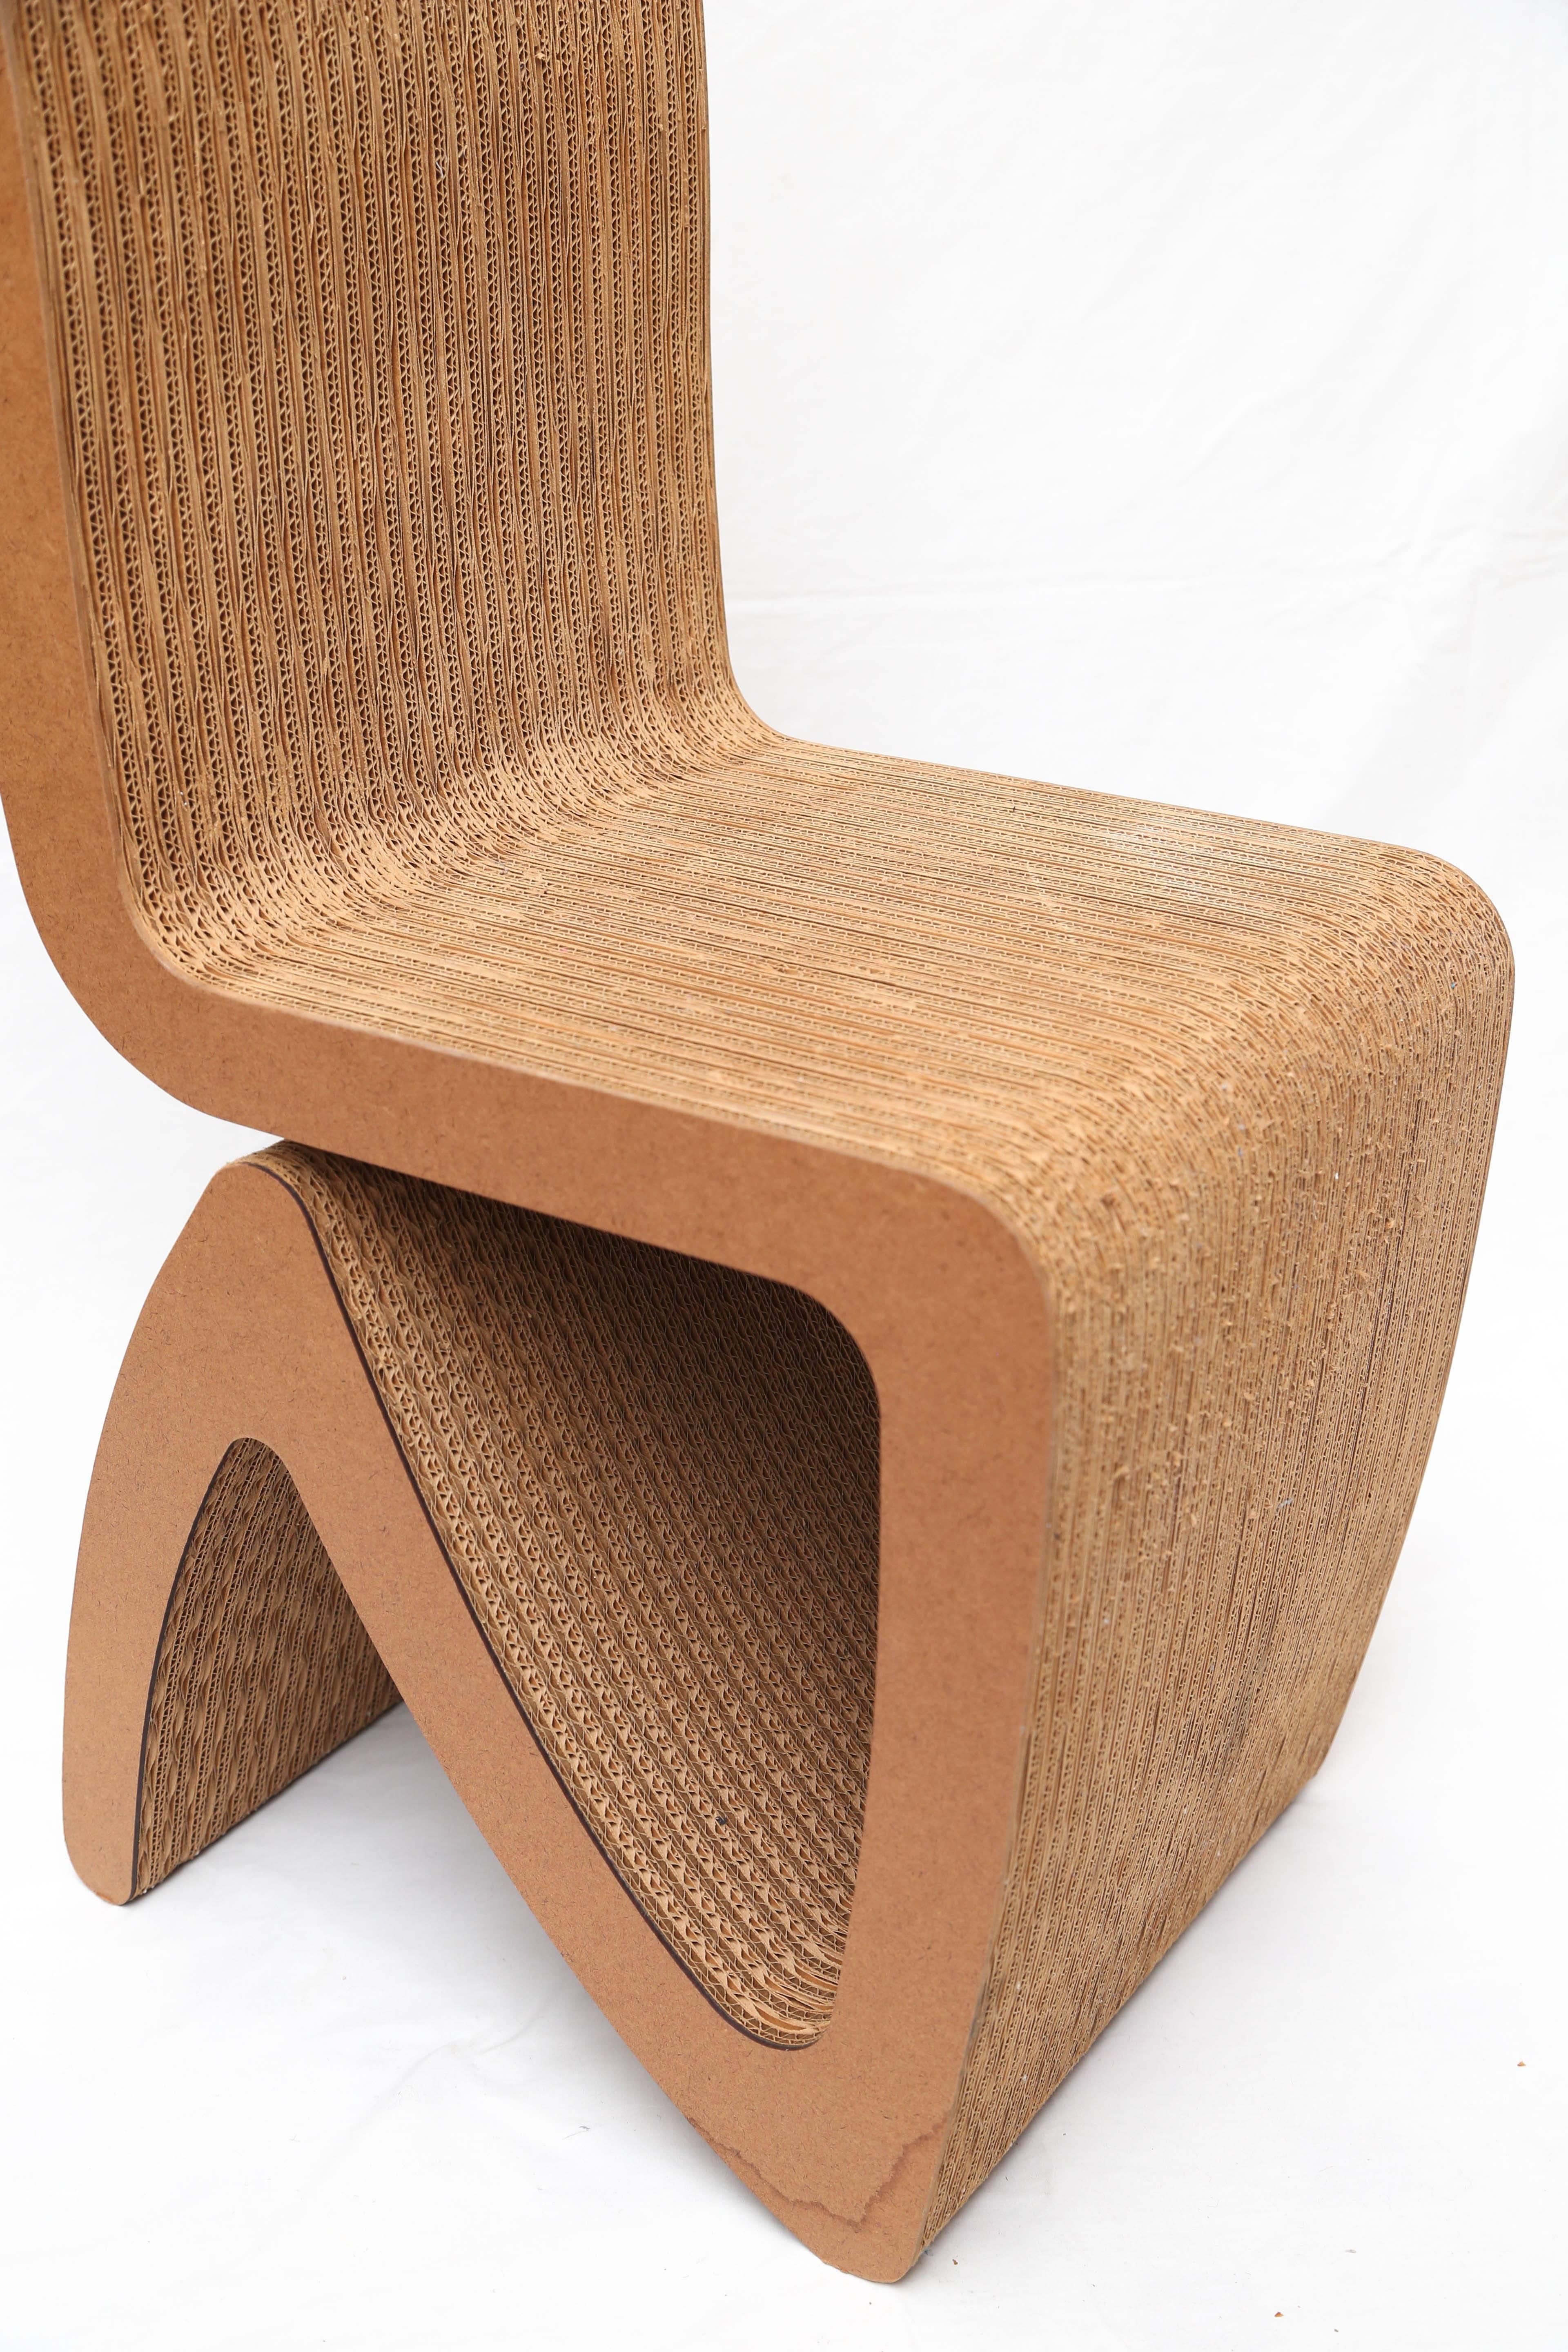 Late 20th Century Pair of Frank Gehry Cardboard Chairs, USA, 1970s